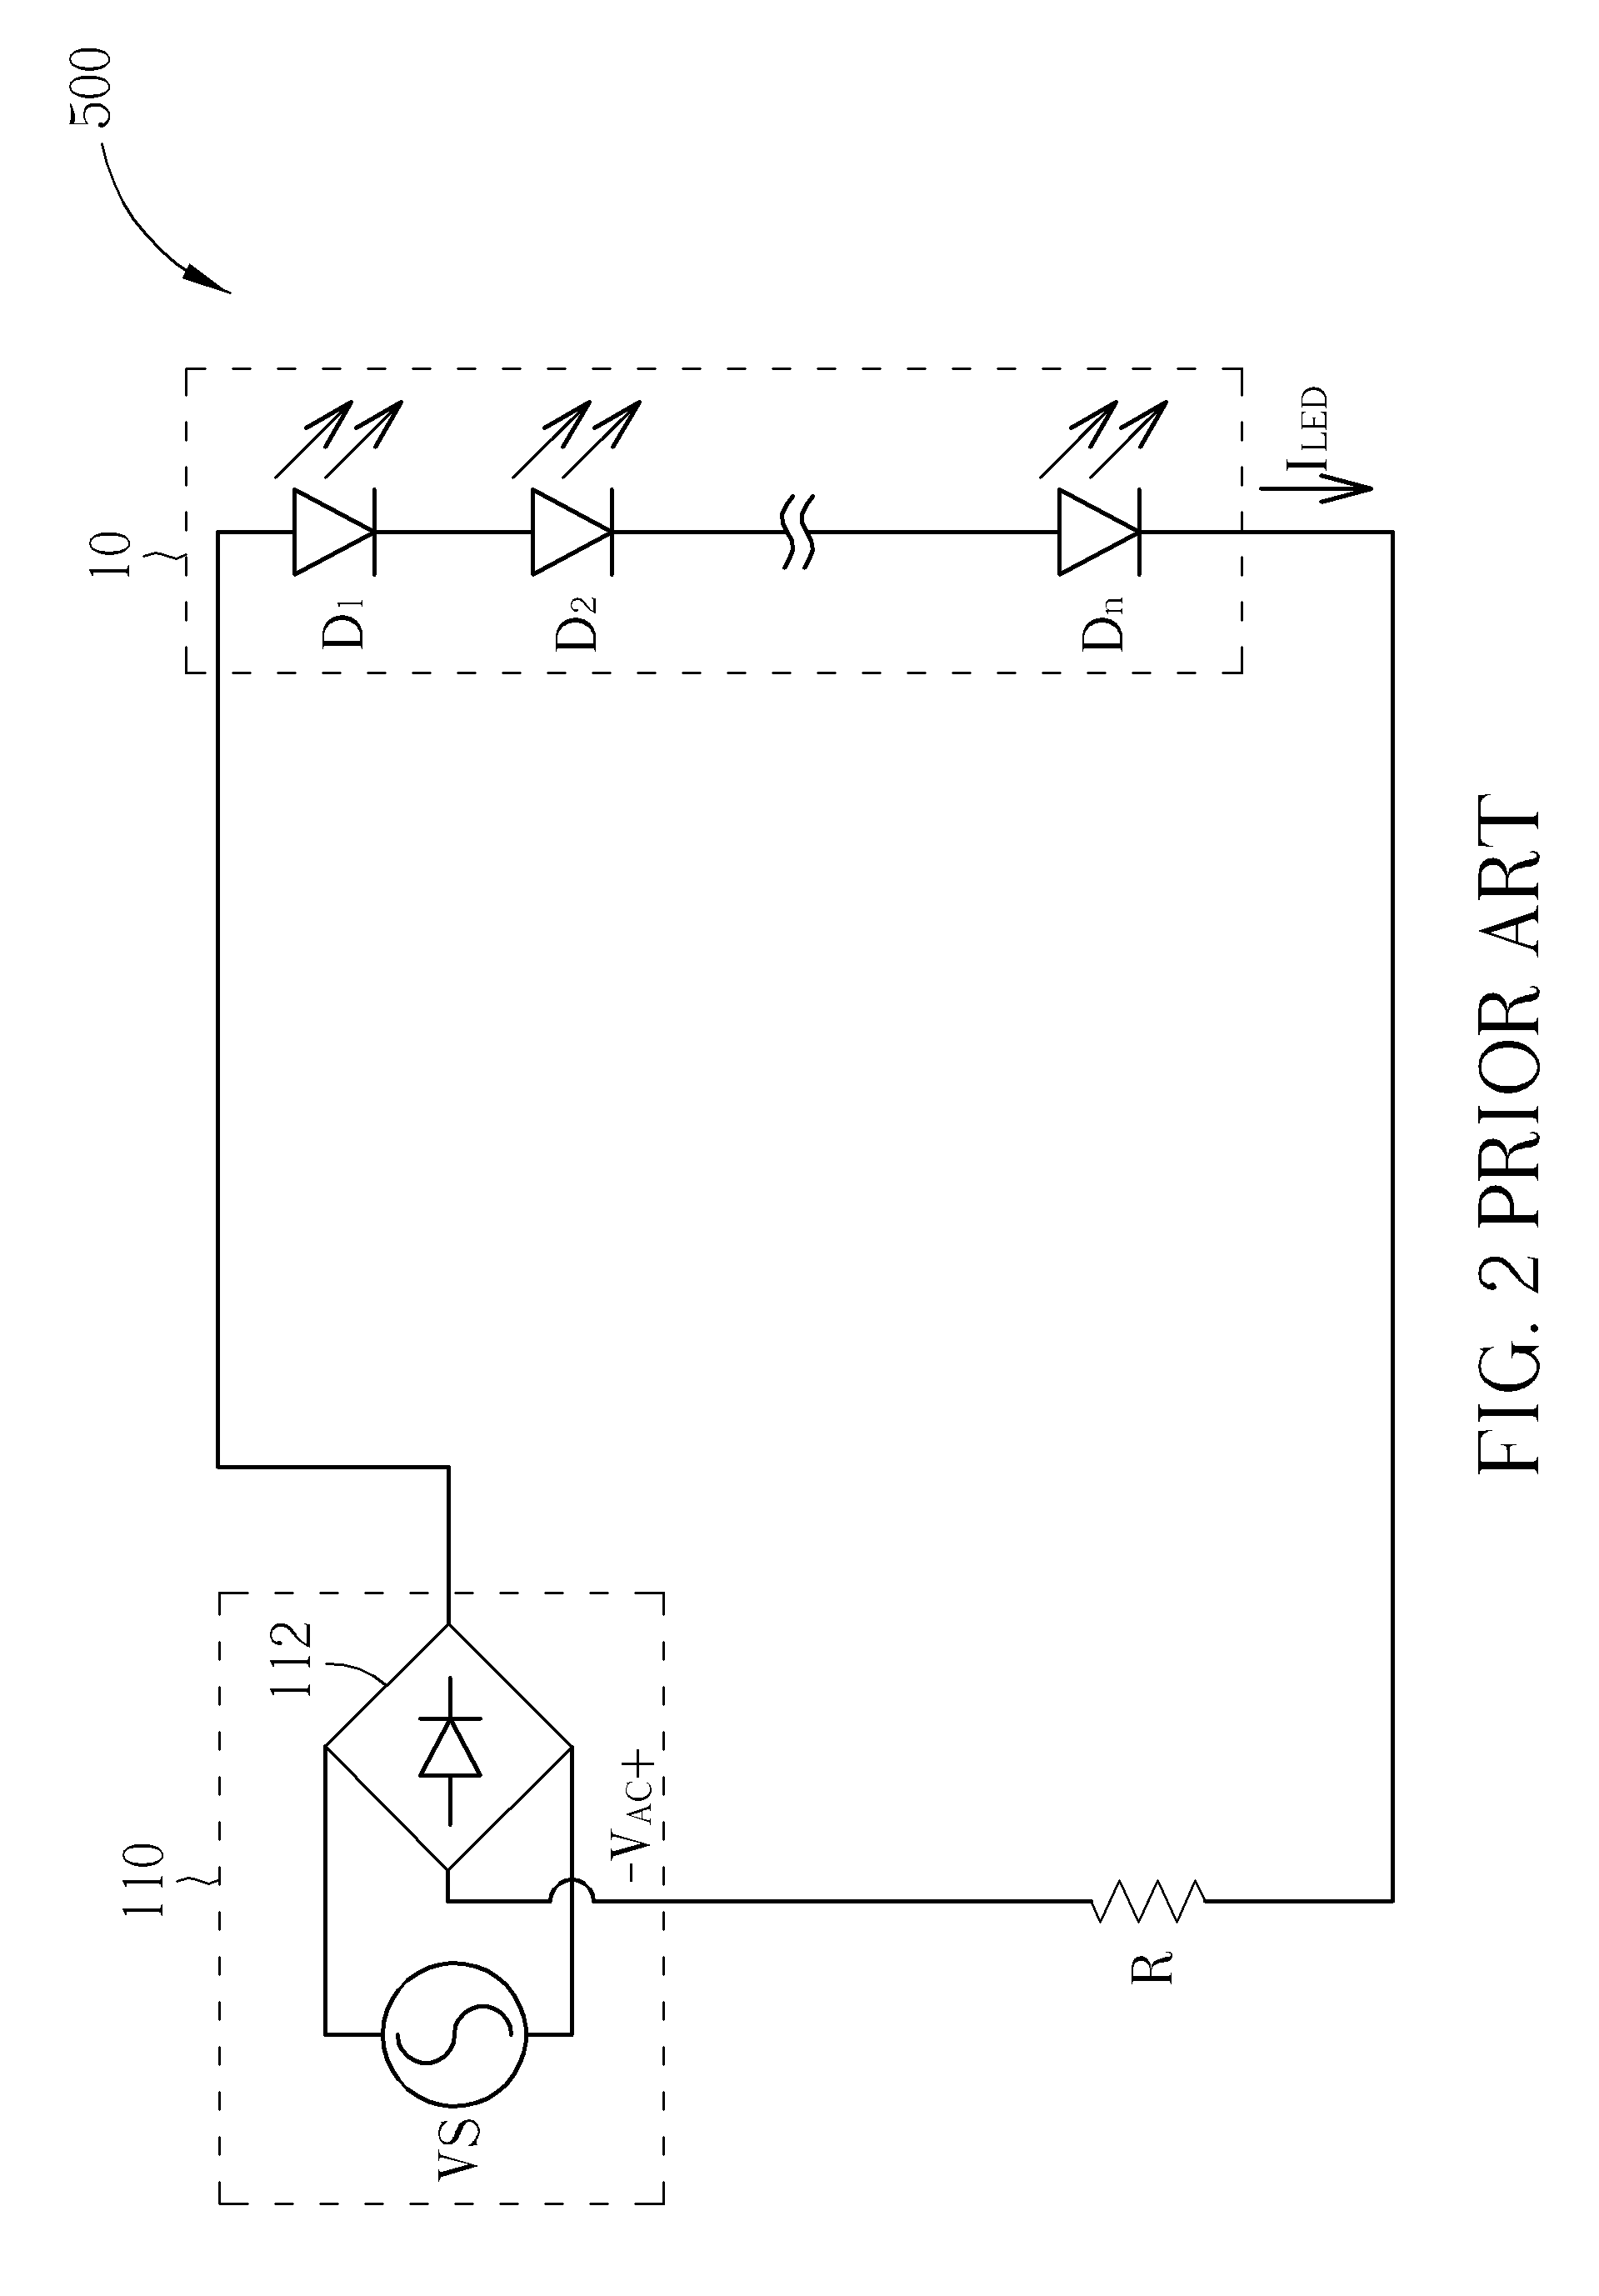 Two-terminal current controller and related LED lighting device